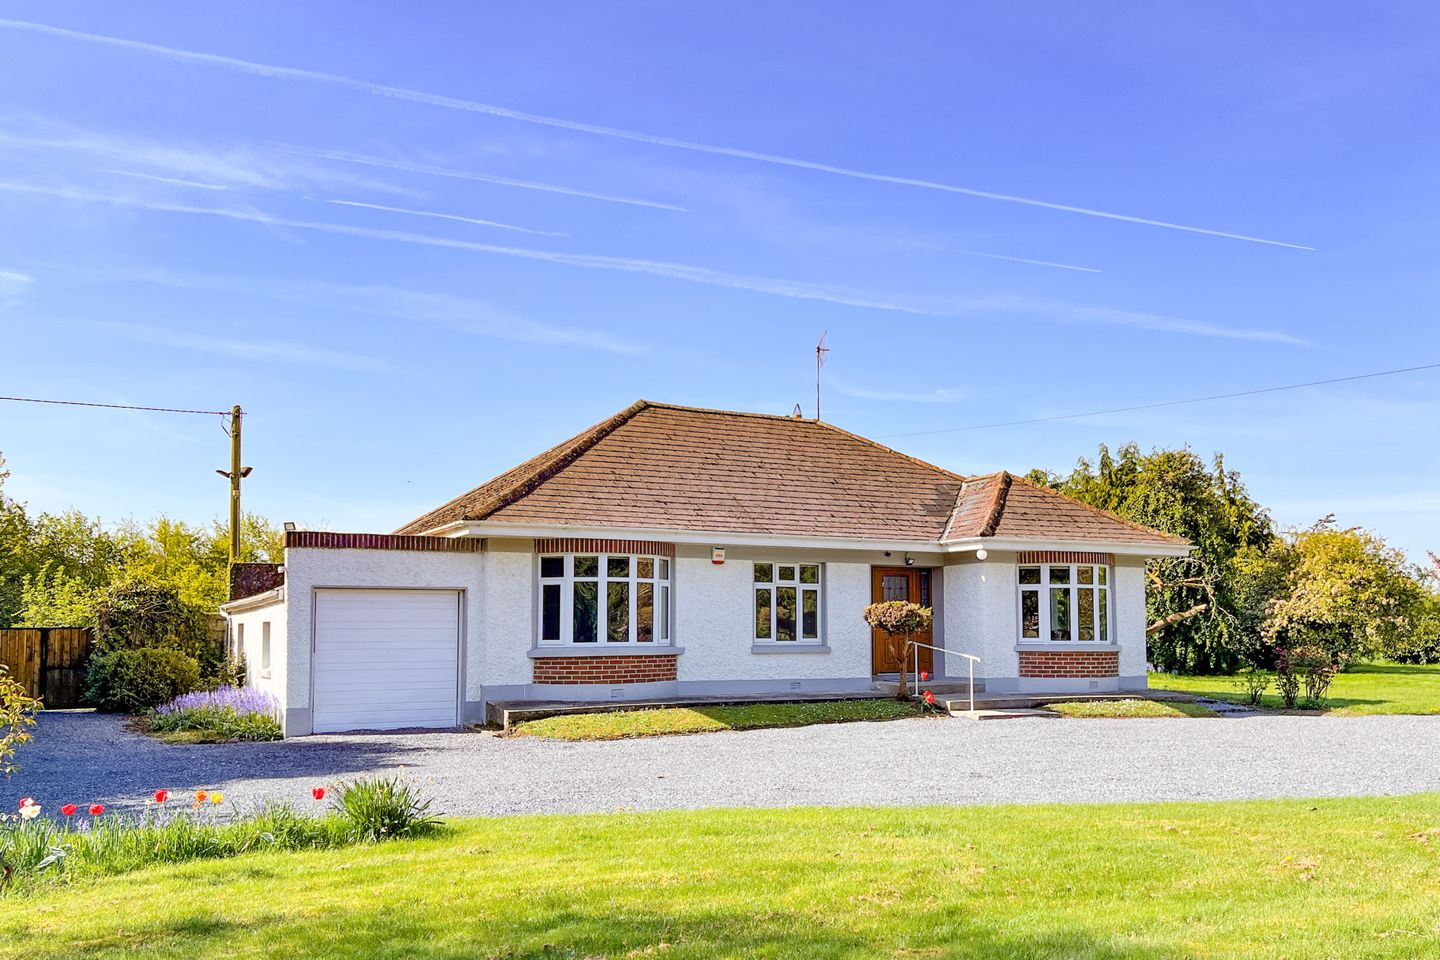 Detached Bungalow On 5.75 Acres, Galbertstown, Holycross, Thurles, Co. Tipperary, E41T263